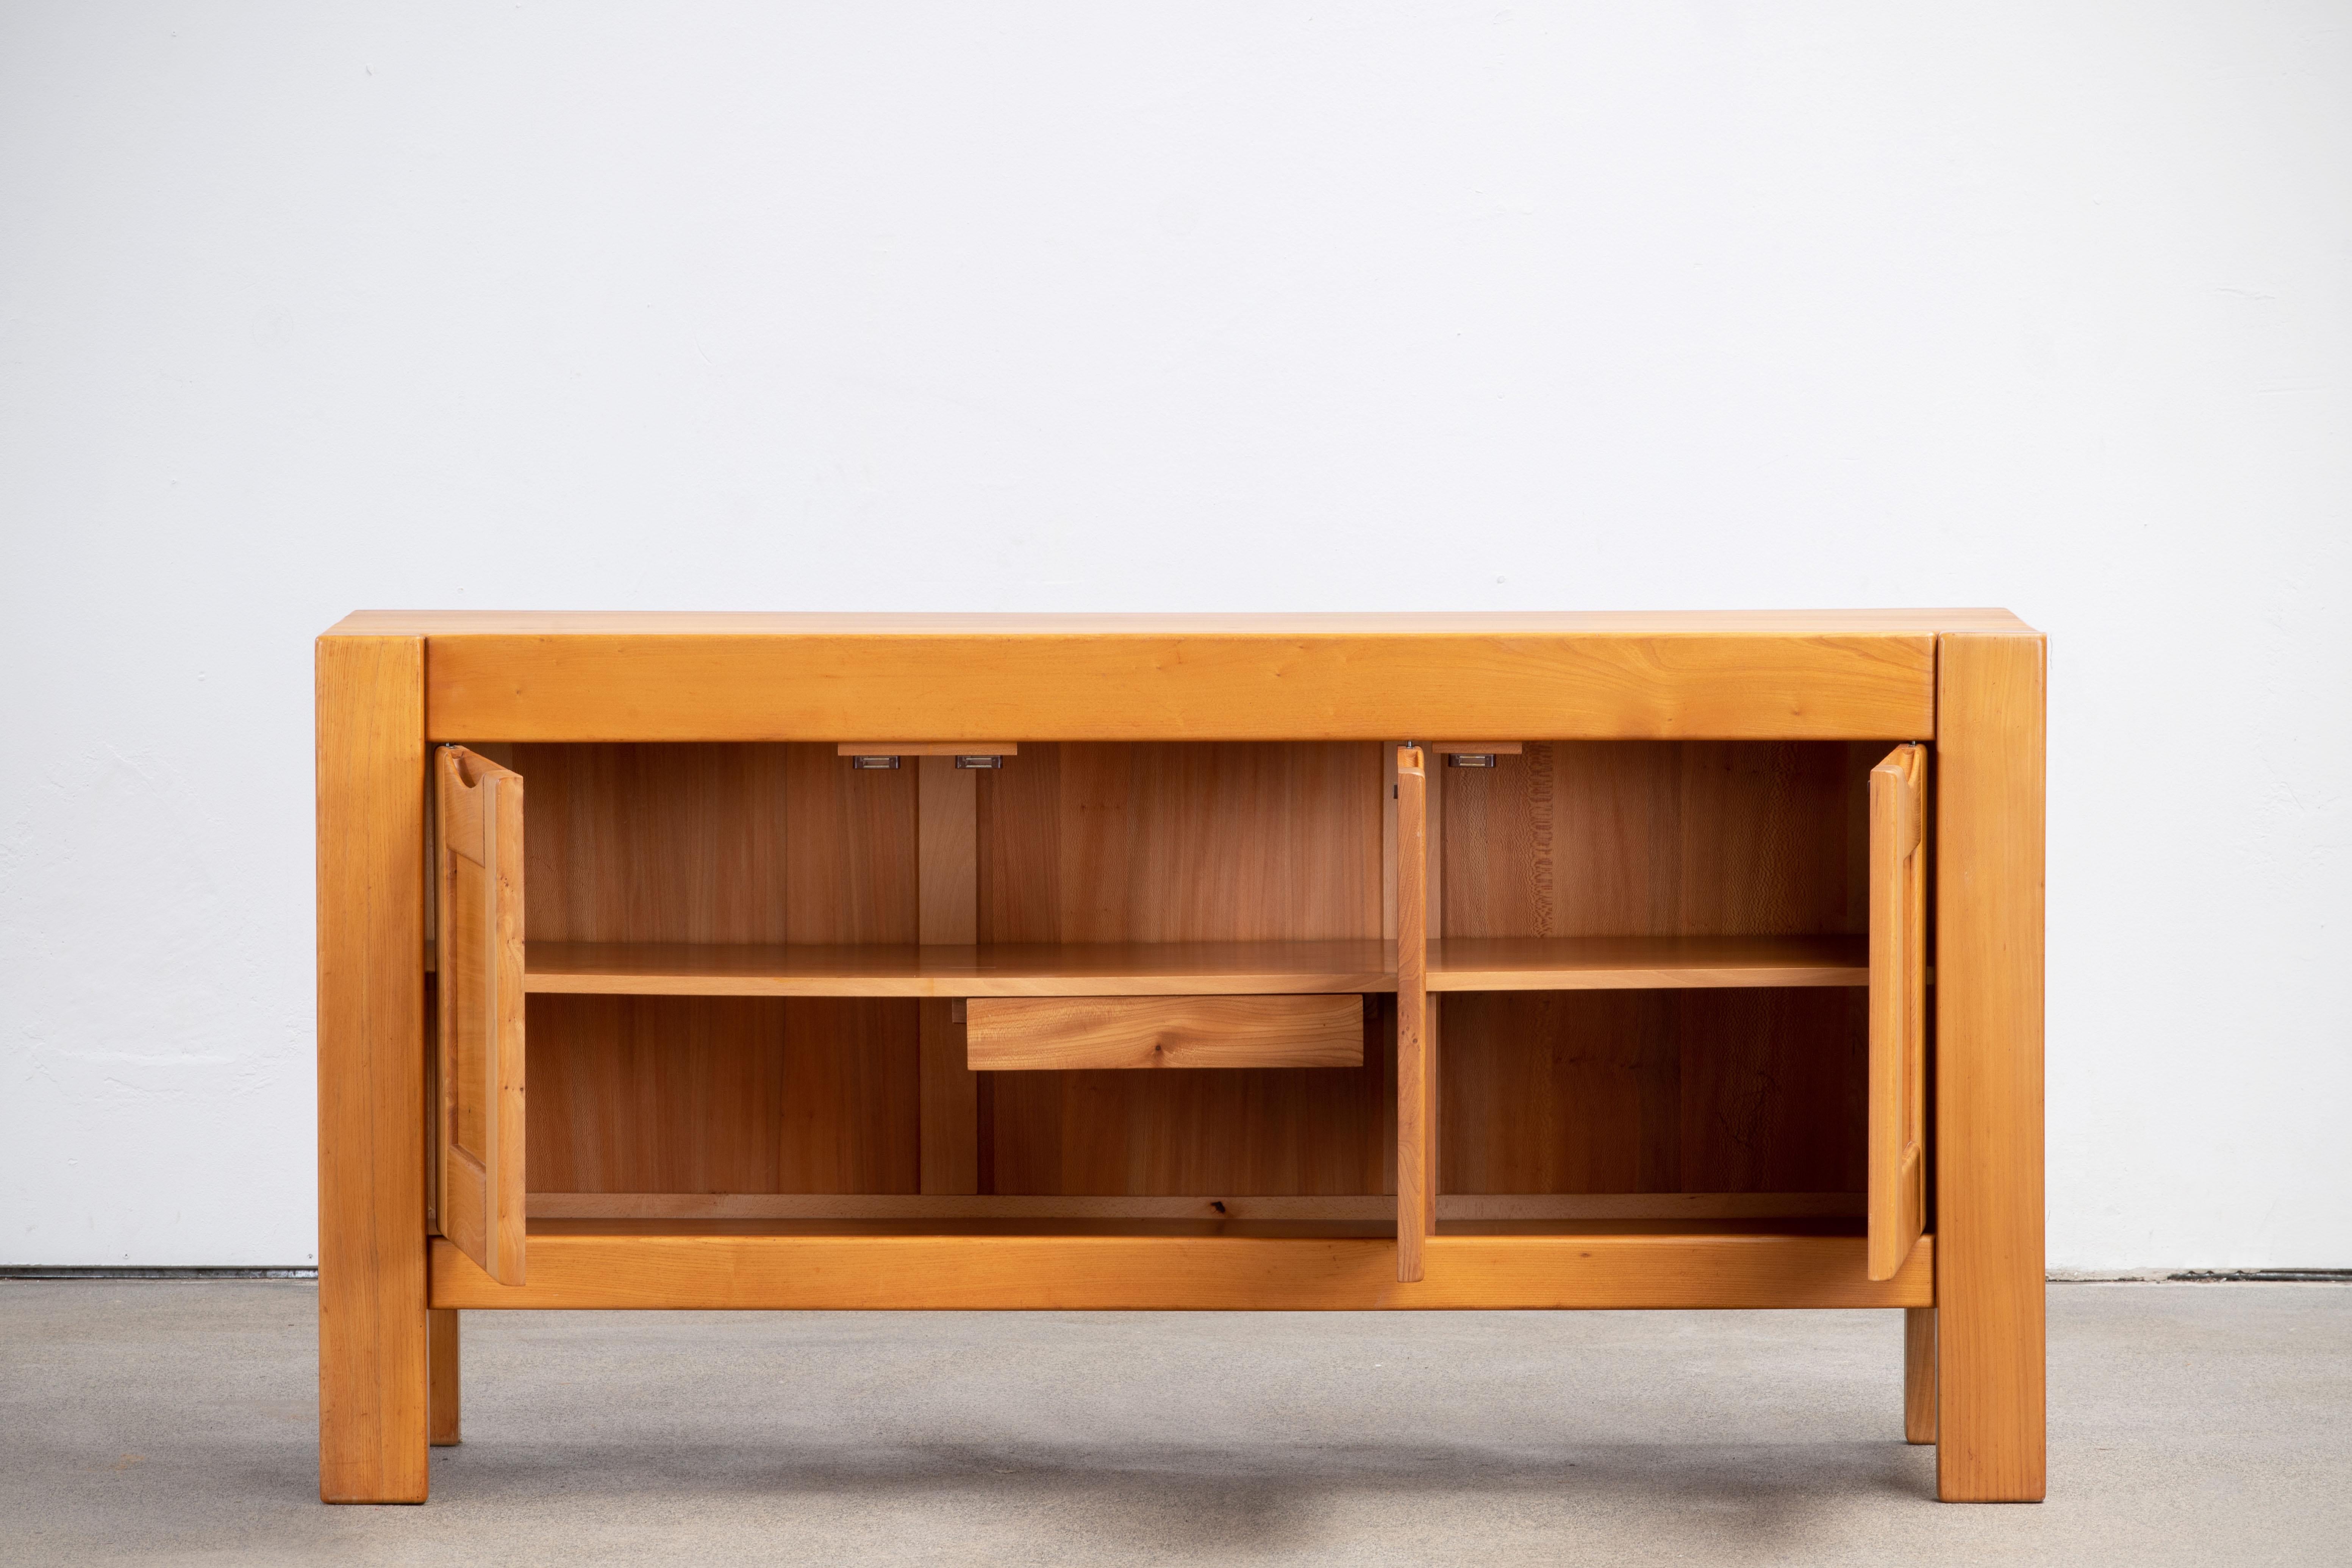 This impressive sideboard is attributed at Maison Regain, France in the late 1970s. The sideboard is made in solid elmwood and has a double door on the left with two beautifully crafted, sculptural handles. 
The wooden connections on the top, the